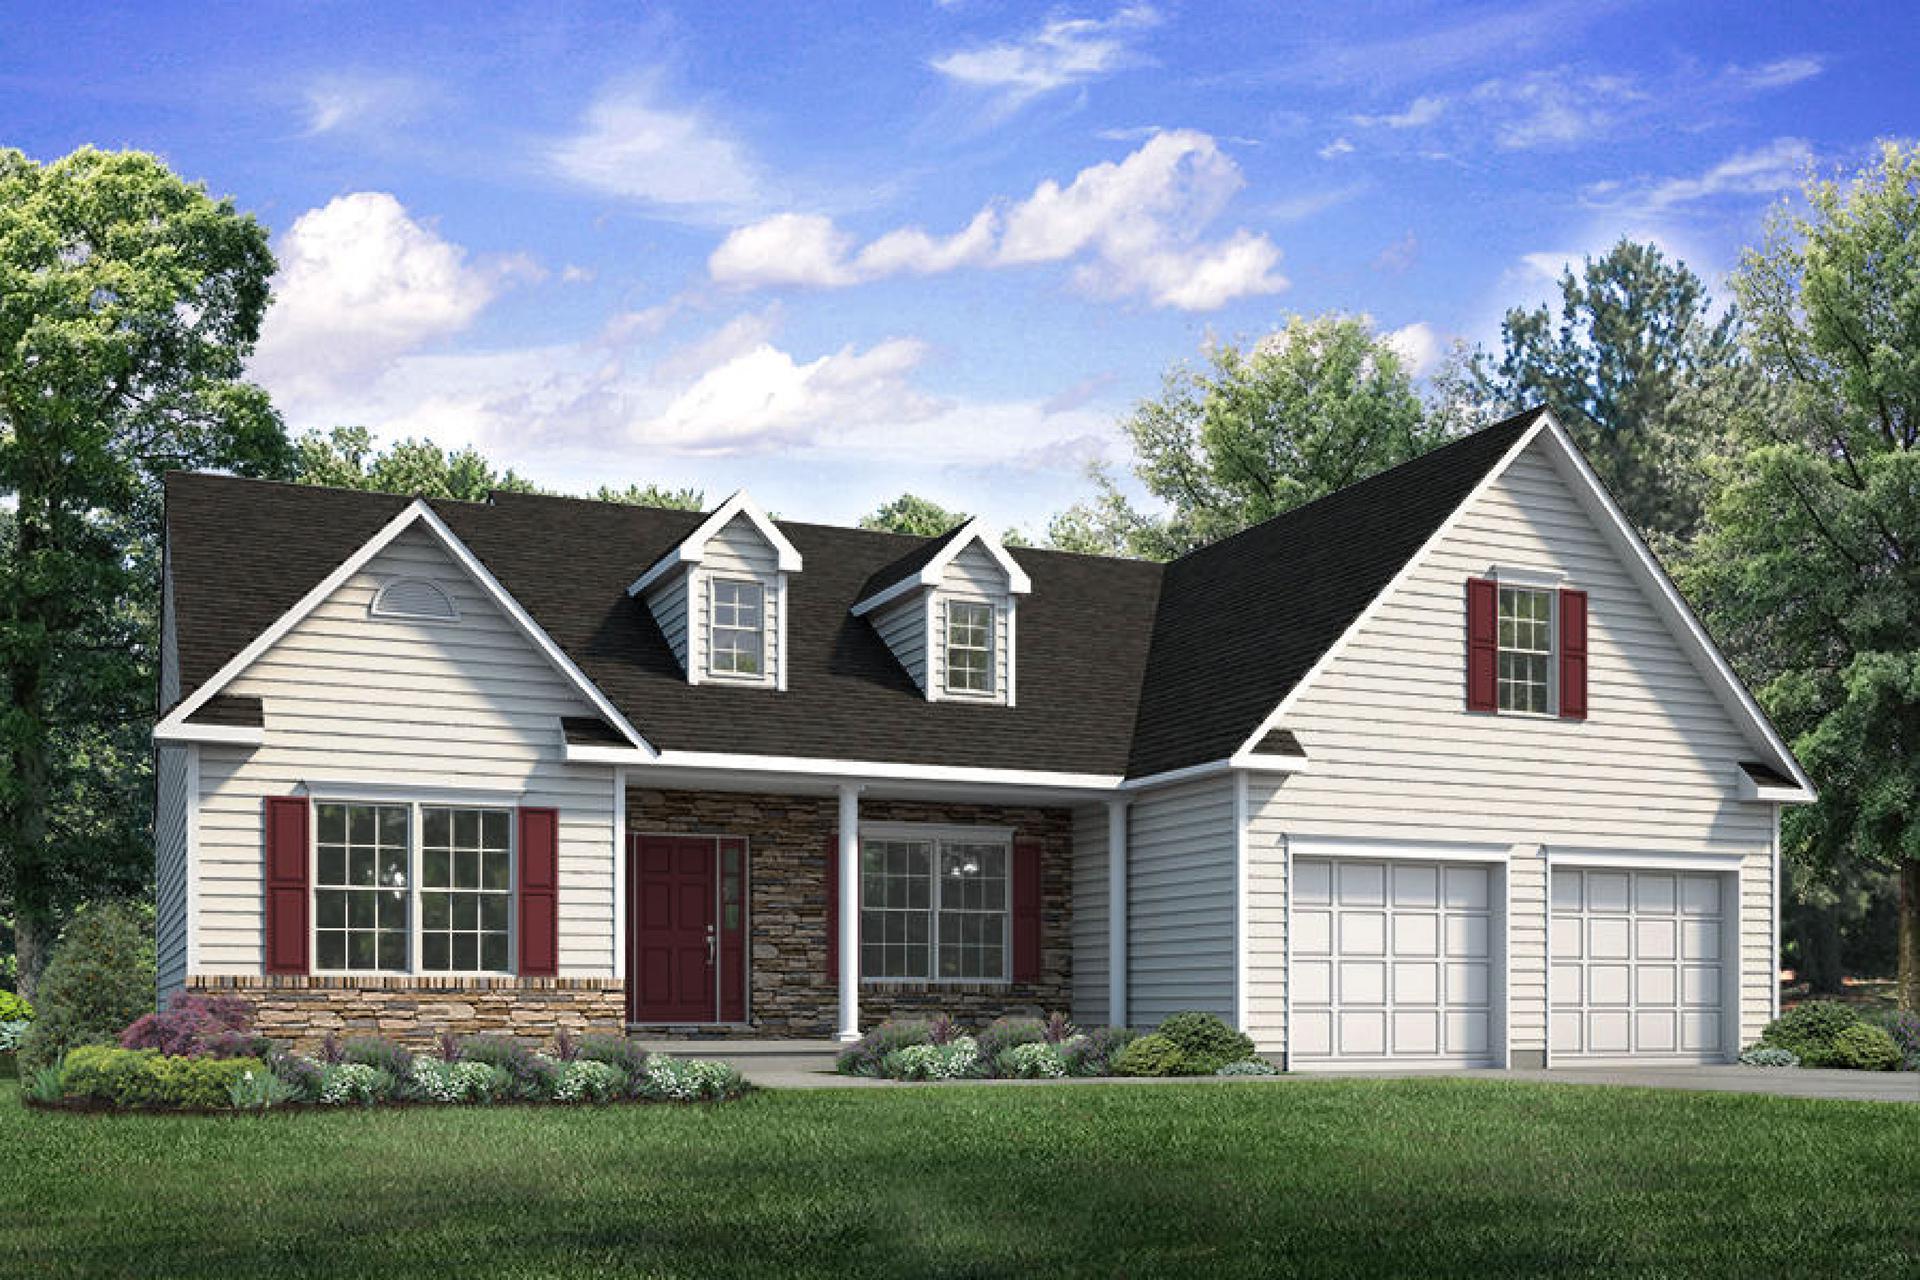 The St. Andrews New Home in Drums PA - Sand Springs